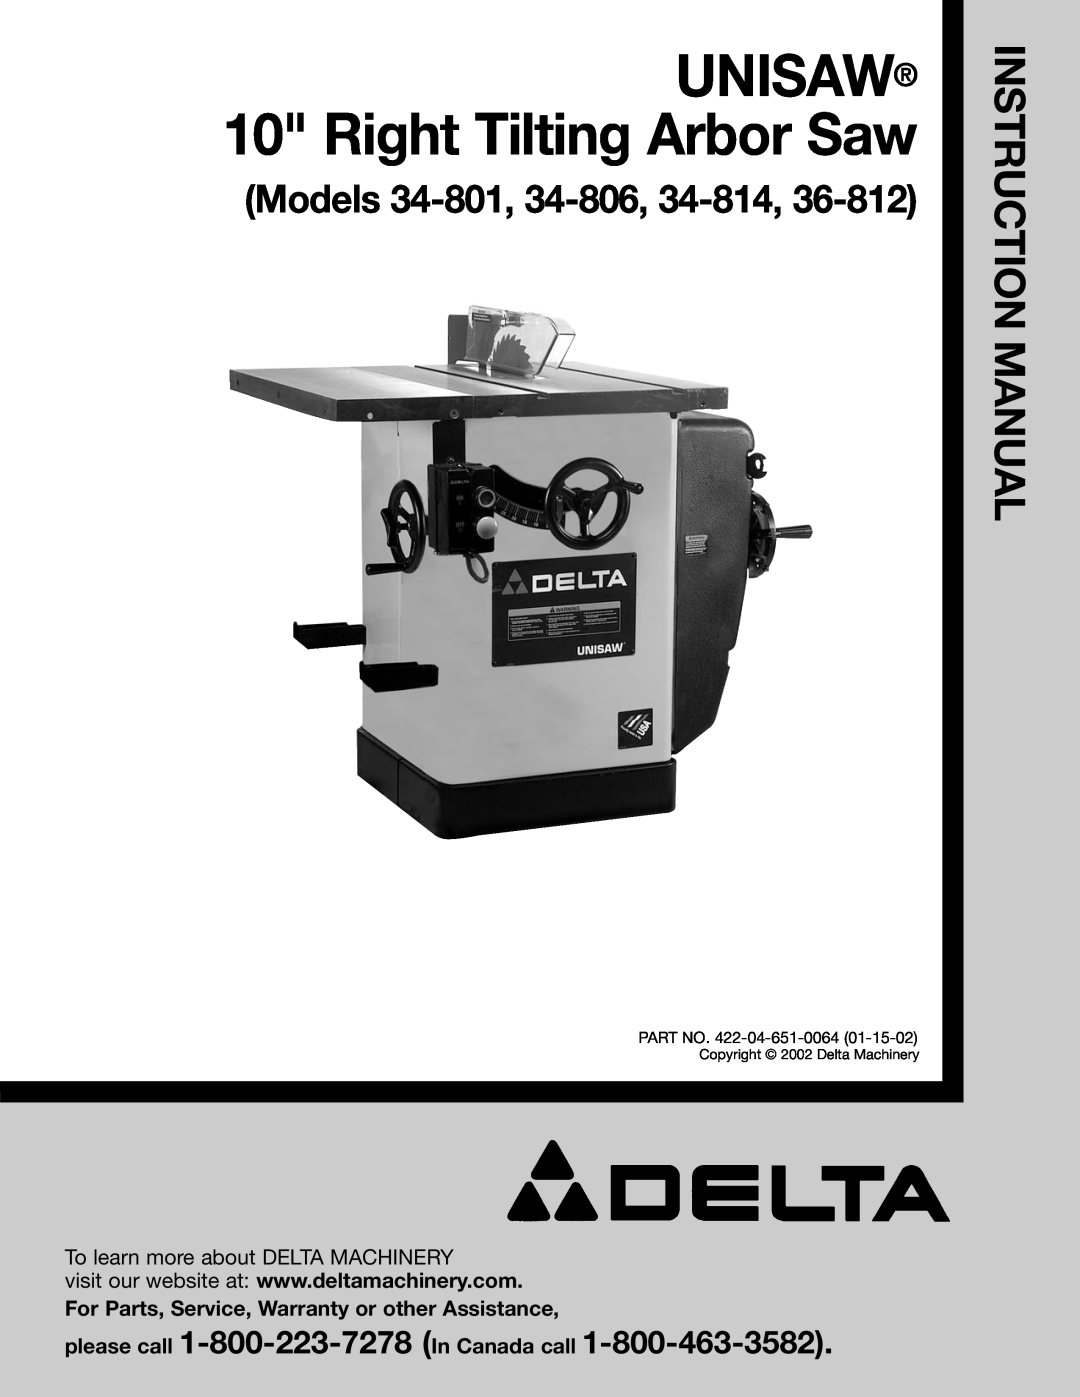 Delta 34-814 instruction manual For Parts, Service, Warranty or other Assistance, UNISAW 10 Right Tilting Arbor Saw 